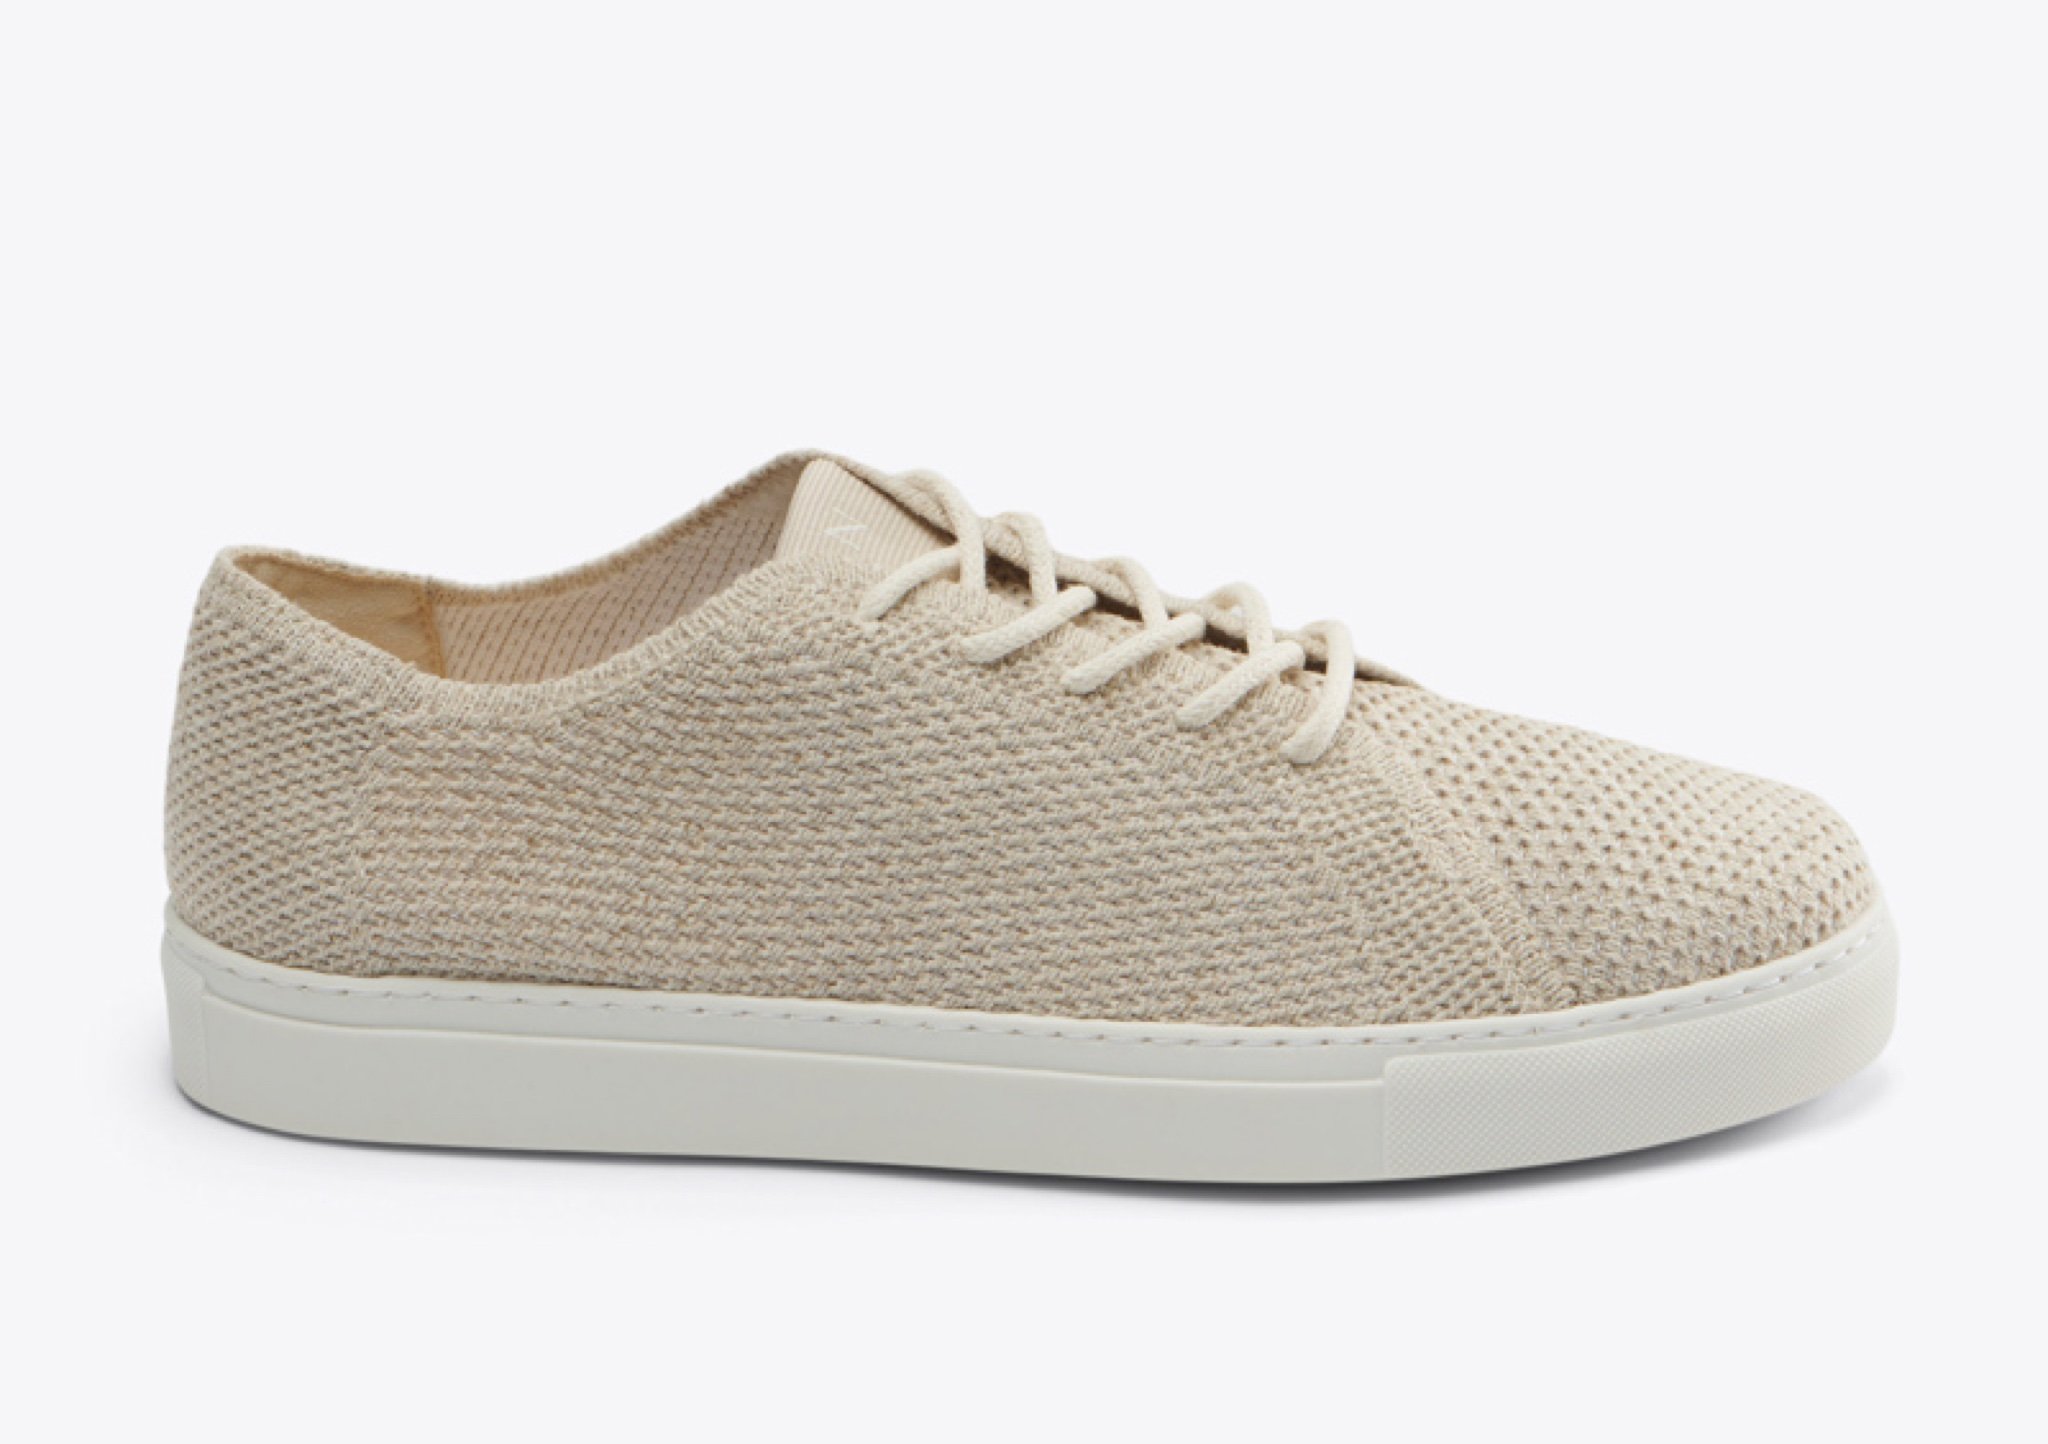 Nisolo Women's Go-To Eco-Knit Sneaker Linen - Every Nisolo product is built on the foundation of comfort, function, and design. 